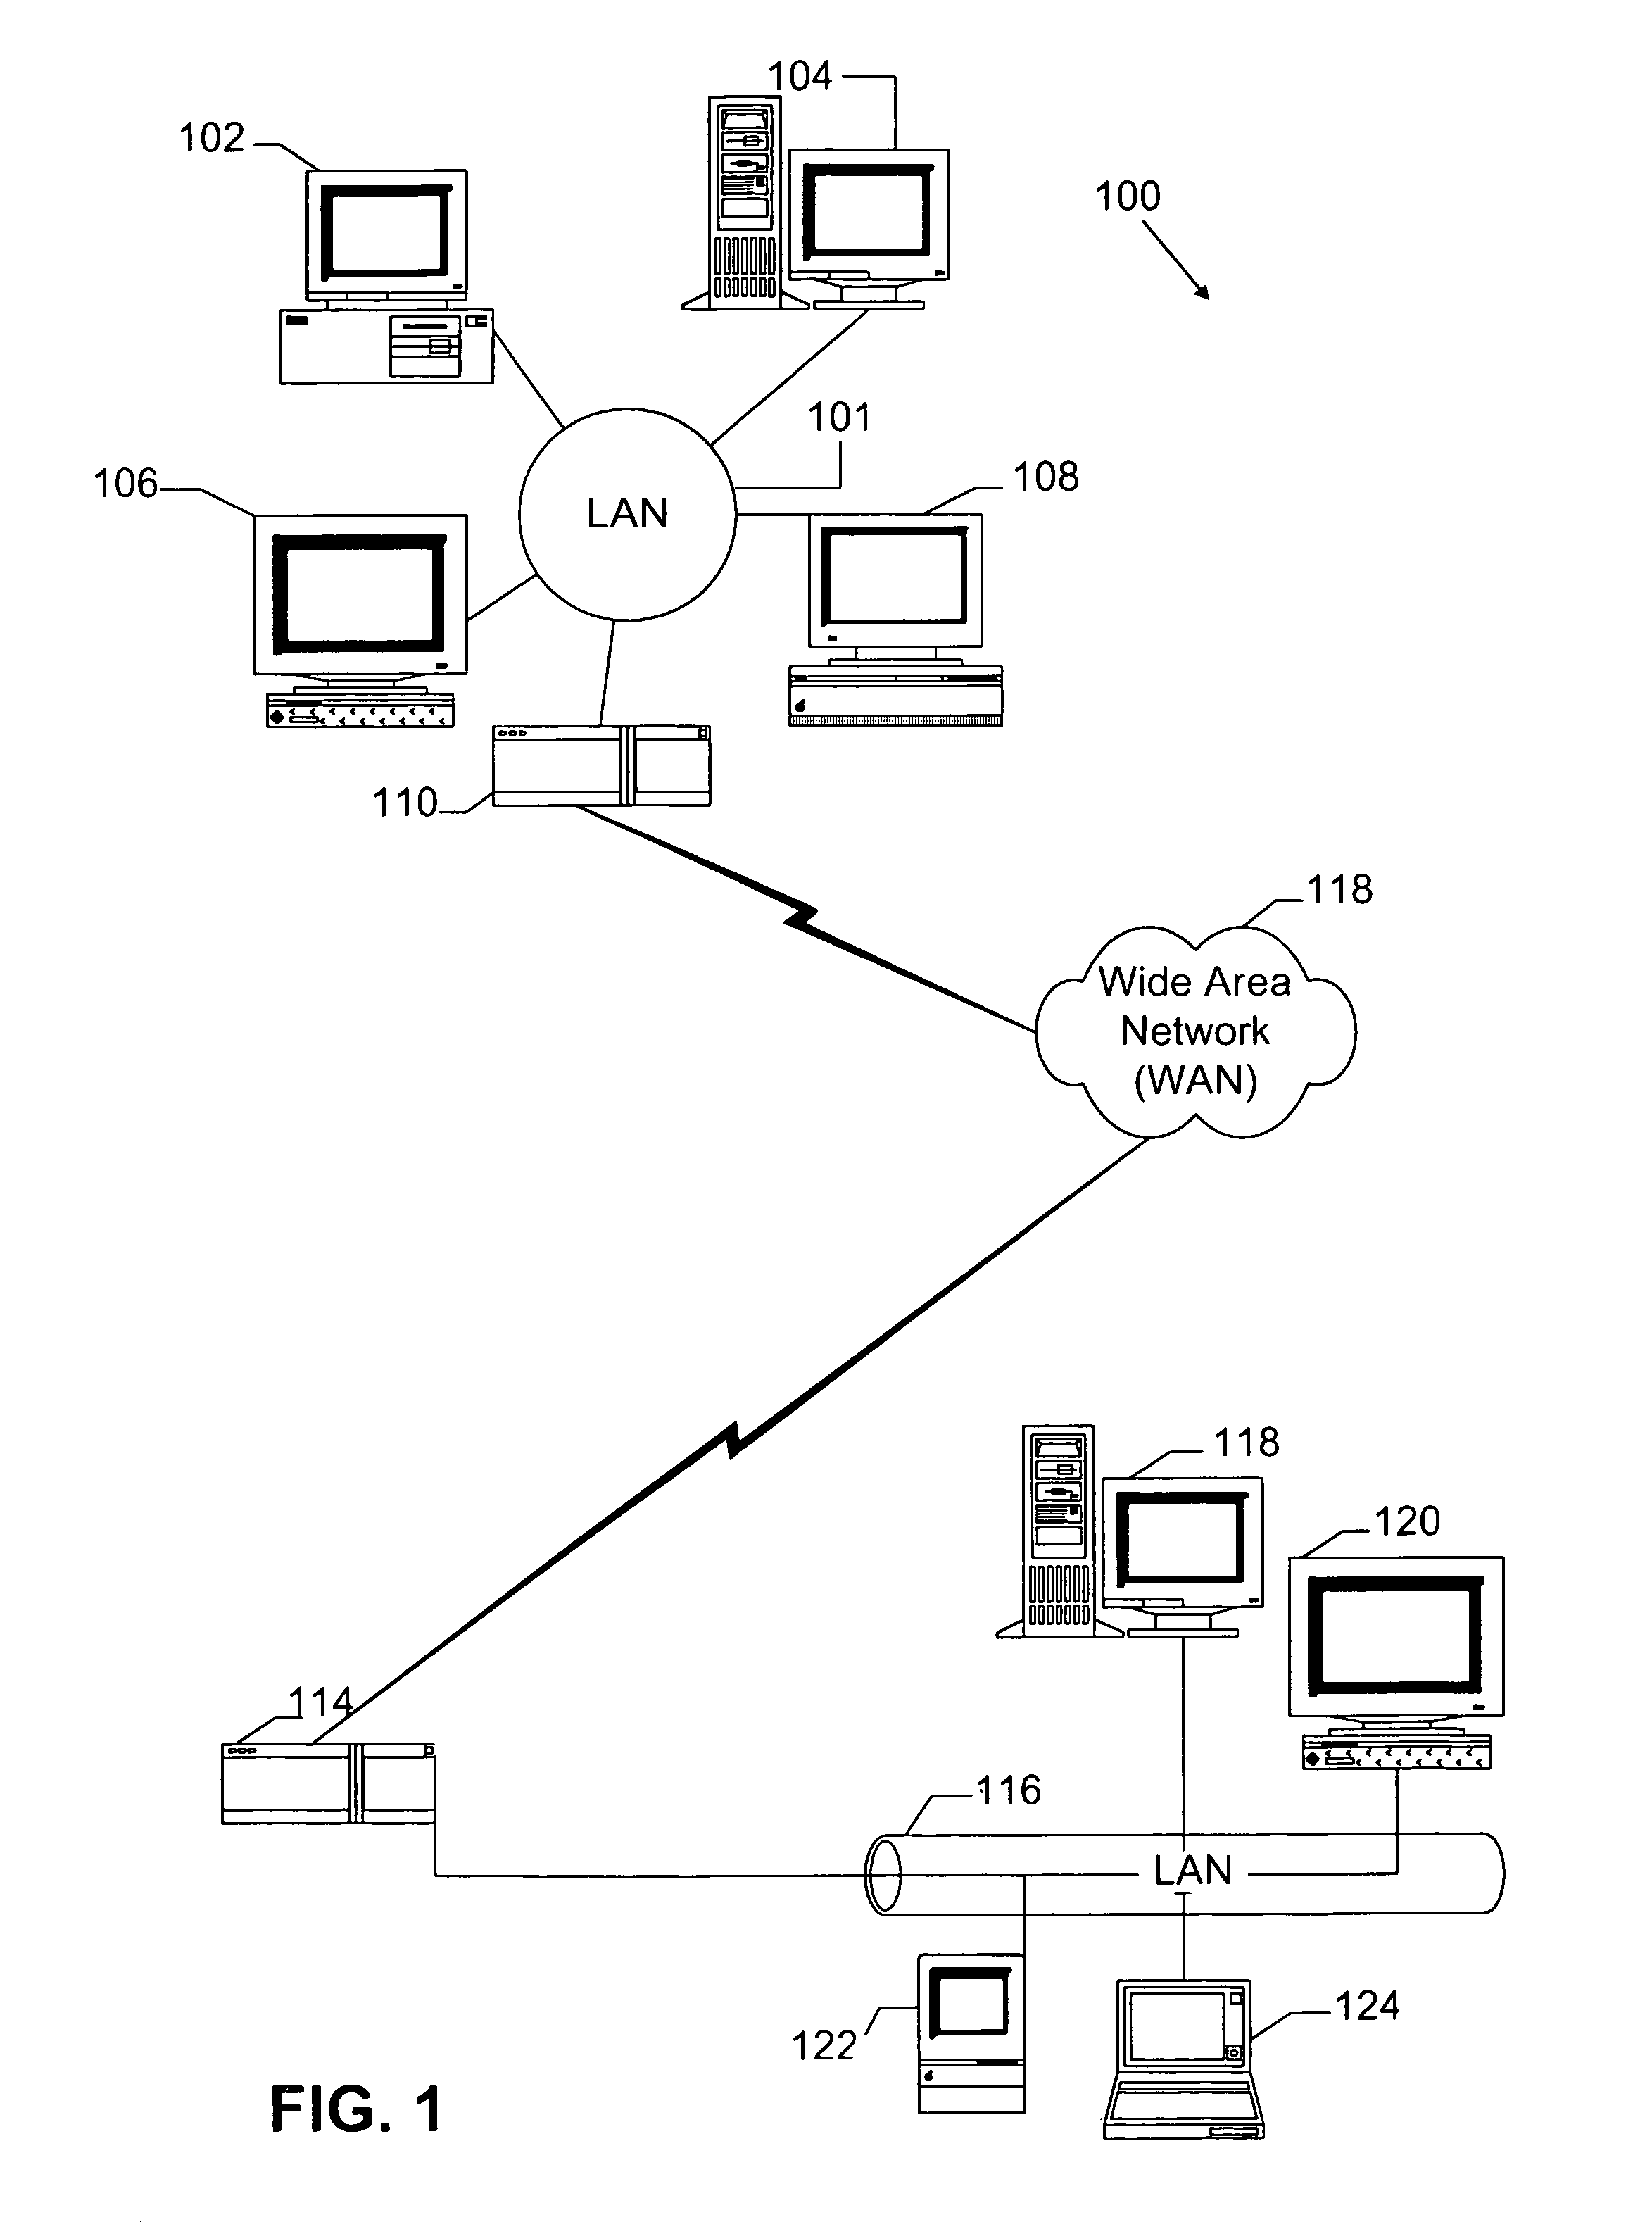 Method and apparatus for dynamic distributed computing over a network